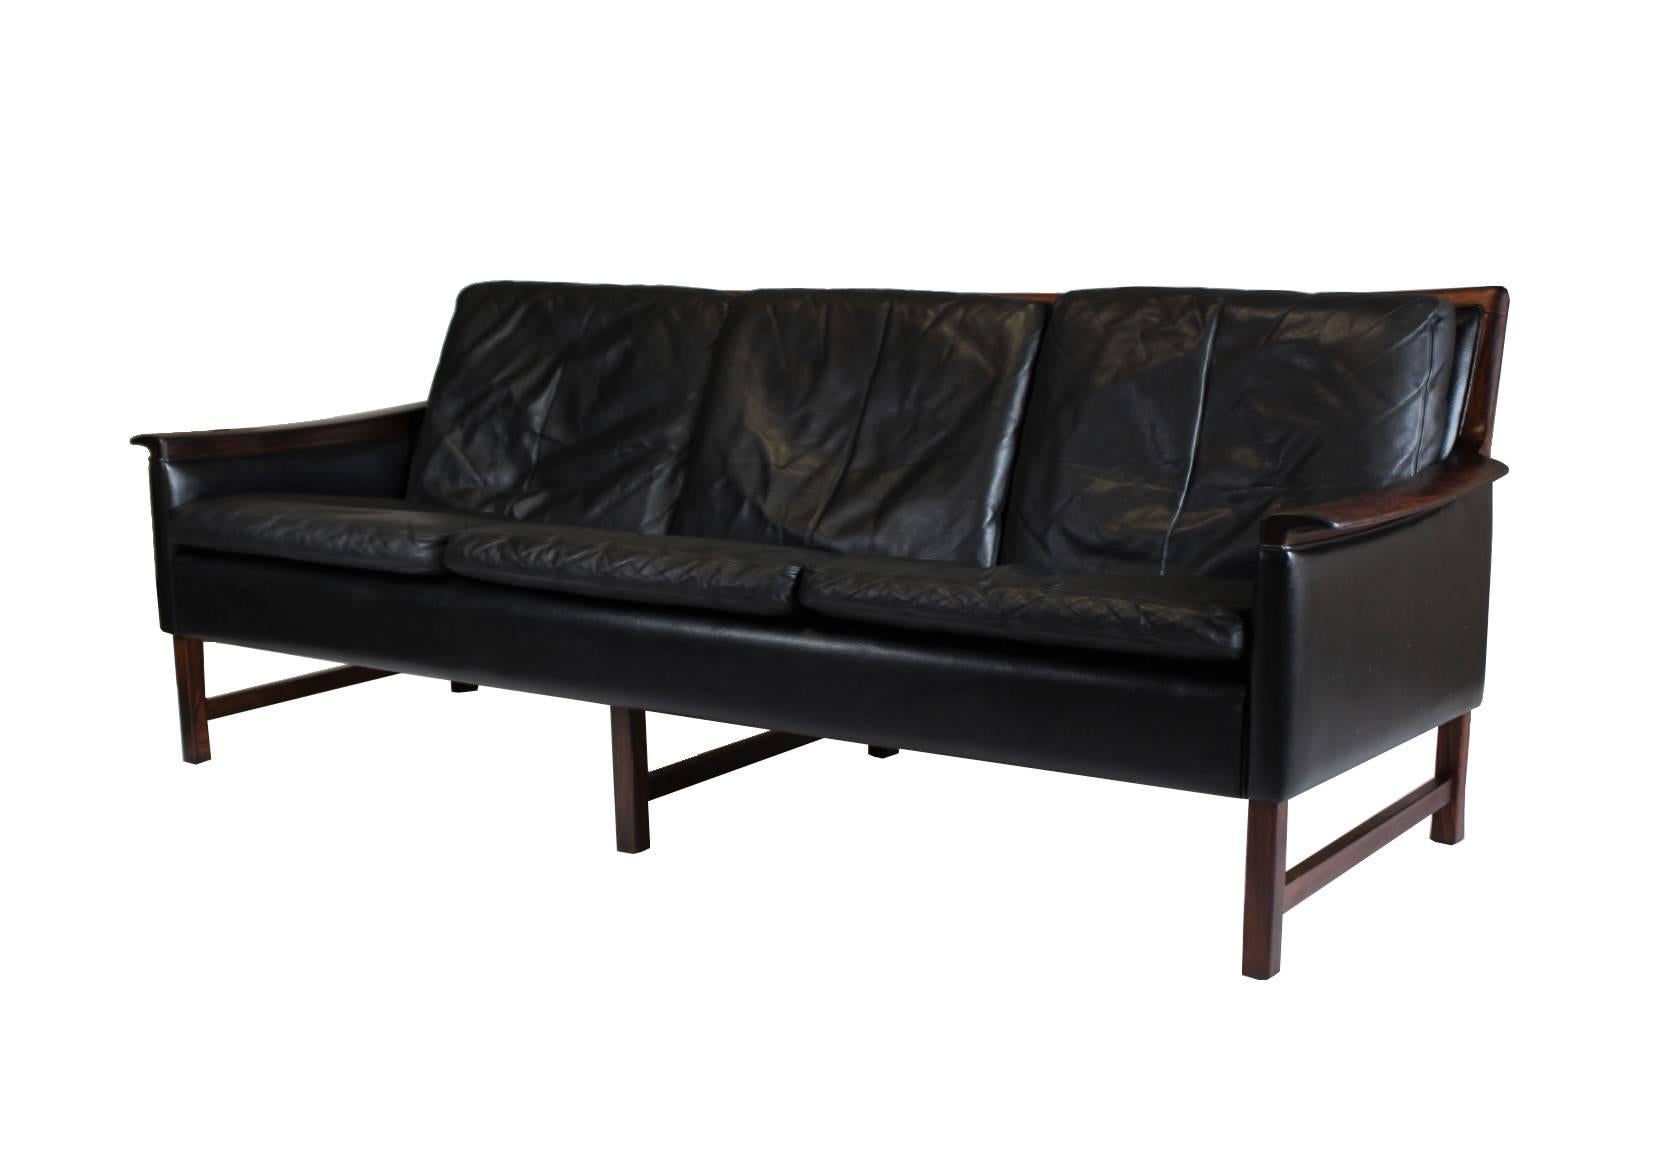 High quality black leather sofa Minerva, designed by Norwegian designer Torbjørn Afdal for Bruksbo. Material is rosewood and perfectly worn leather. The sofa is in excellent vintage condition.